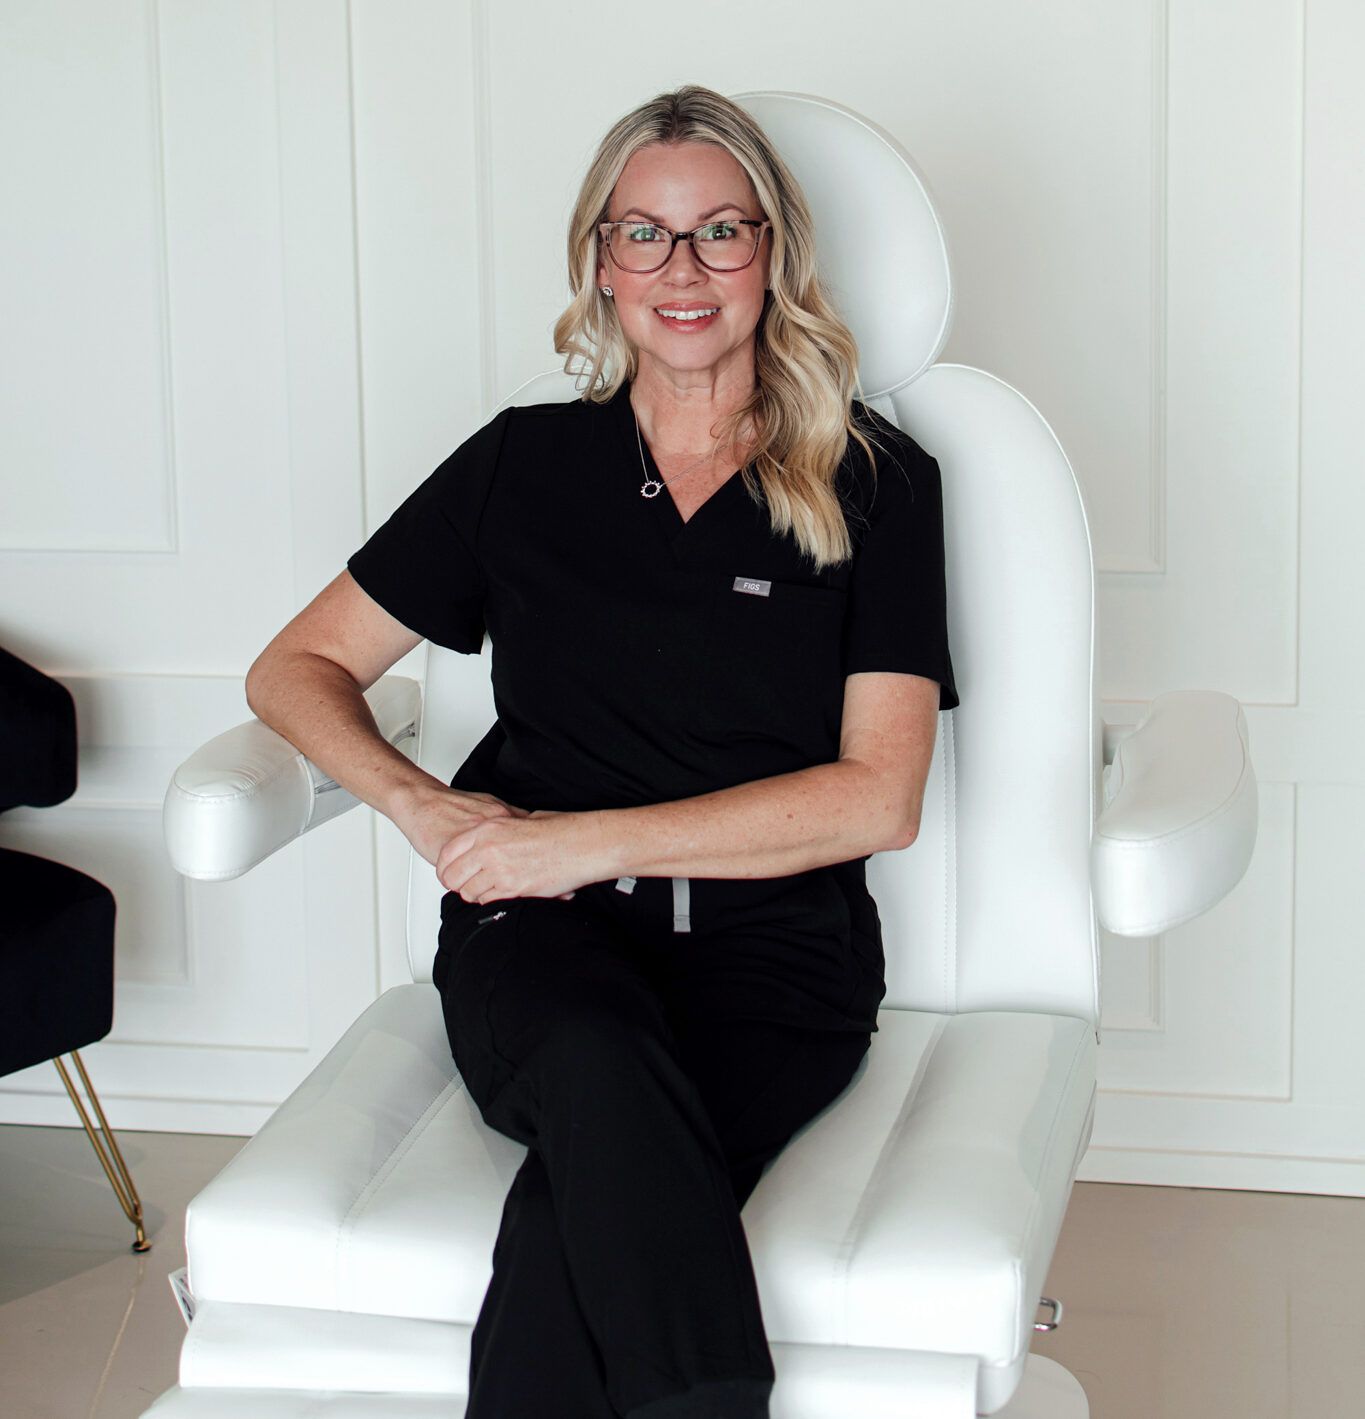 A woman wearing glasses is sitting in a white chair.